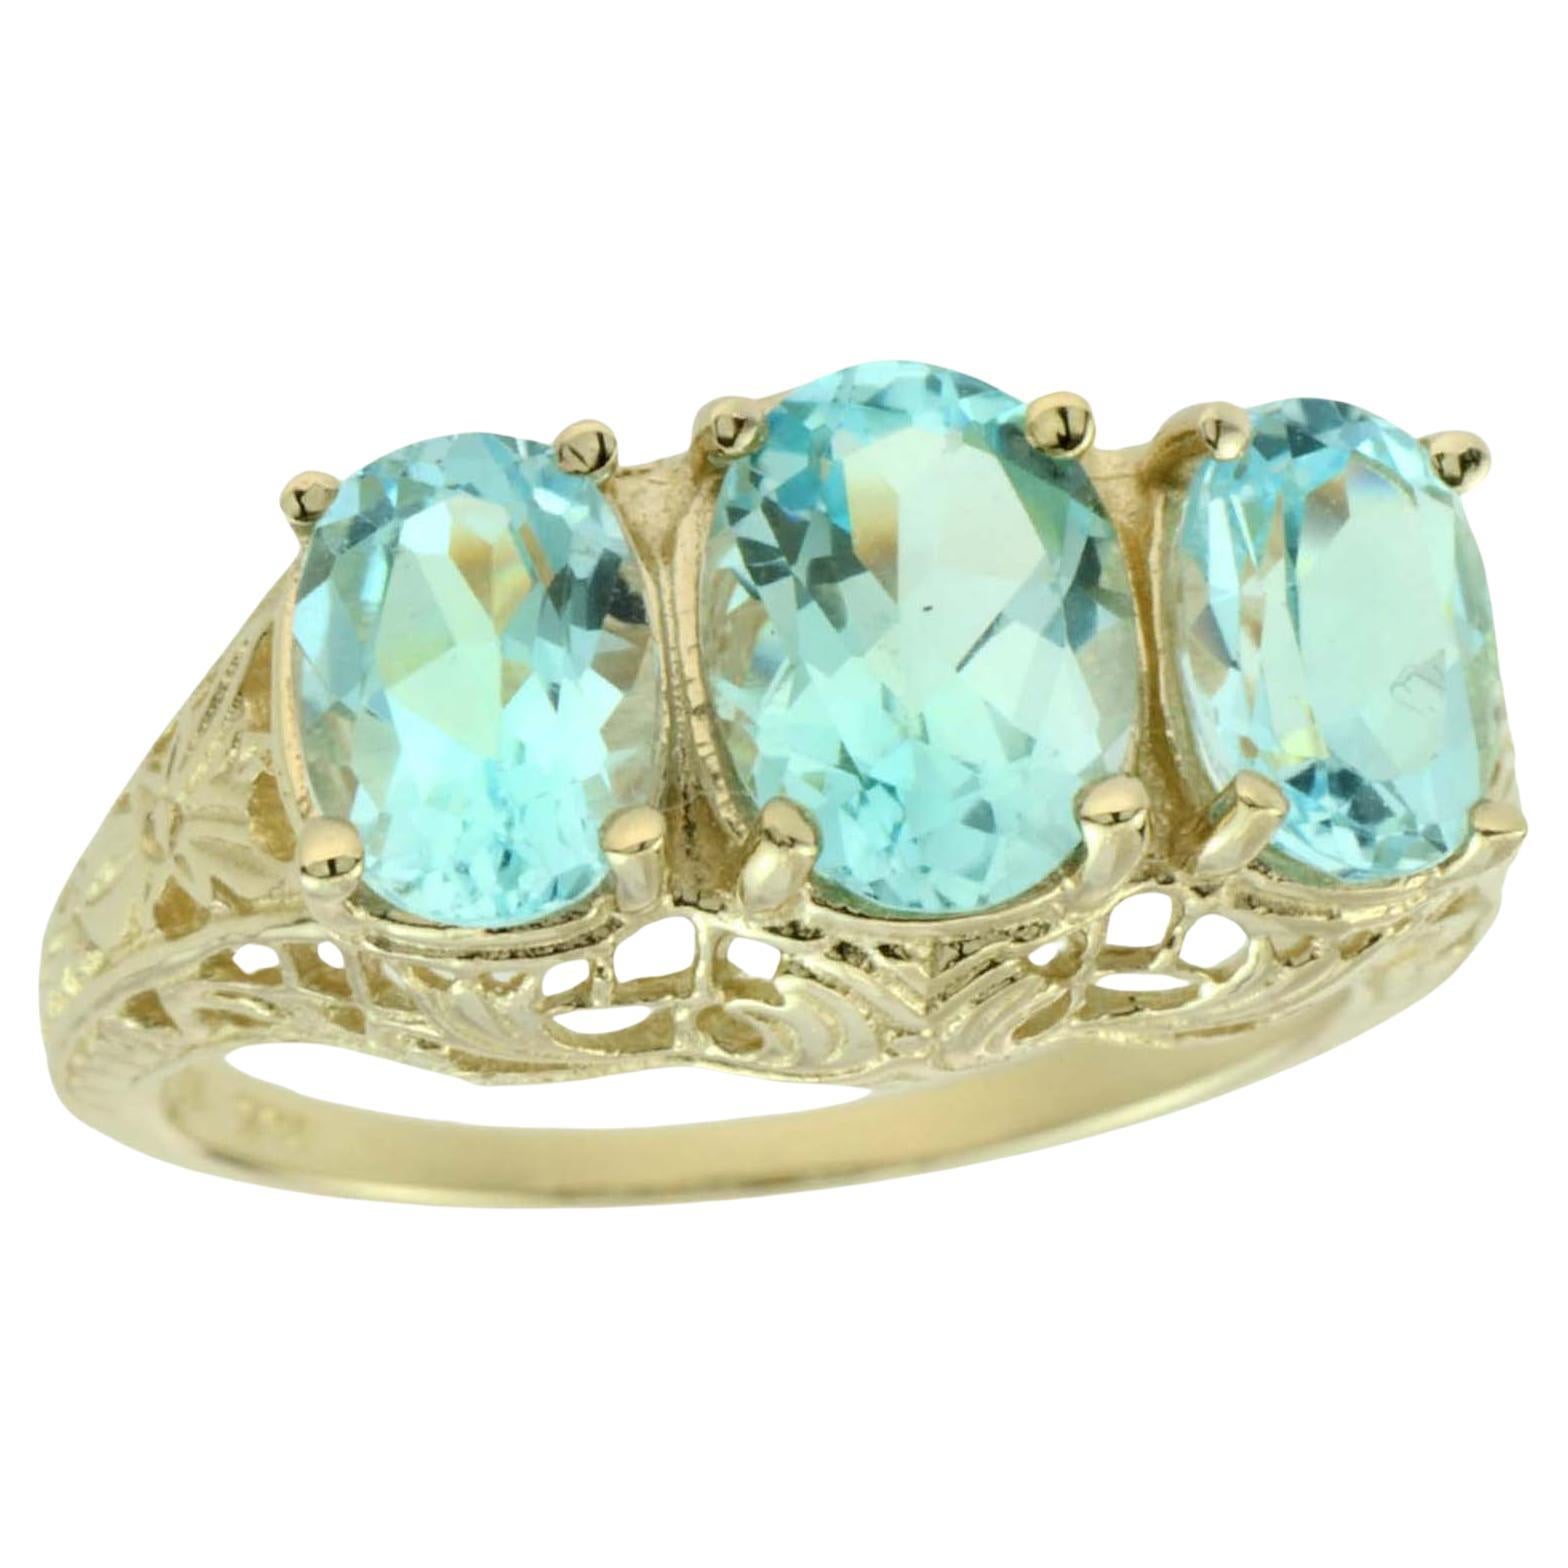 Natural Blue Topaz Art Deco Style Three Stone Filigree Ring in Solid 9K Gold